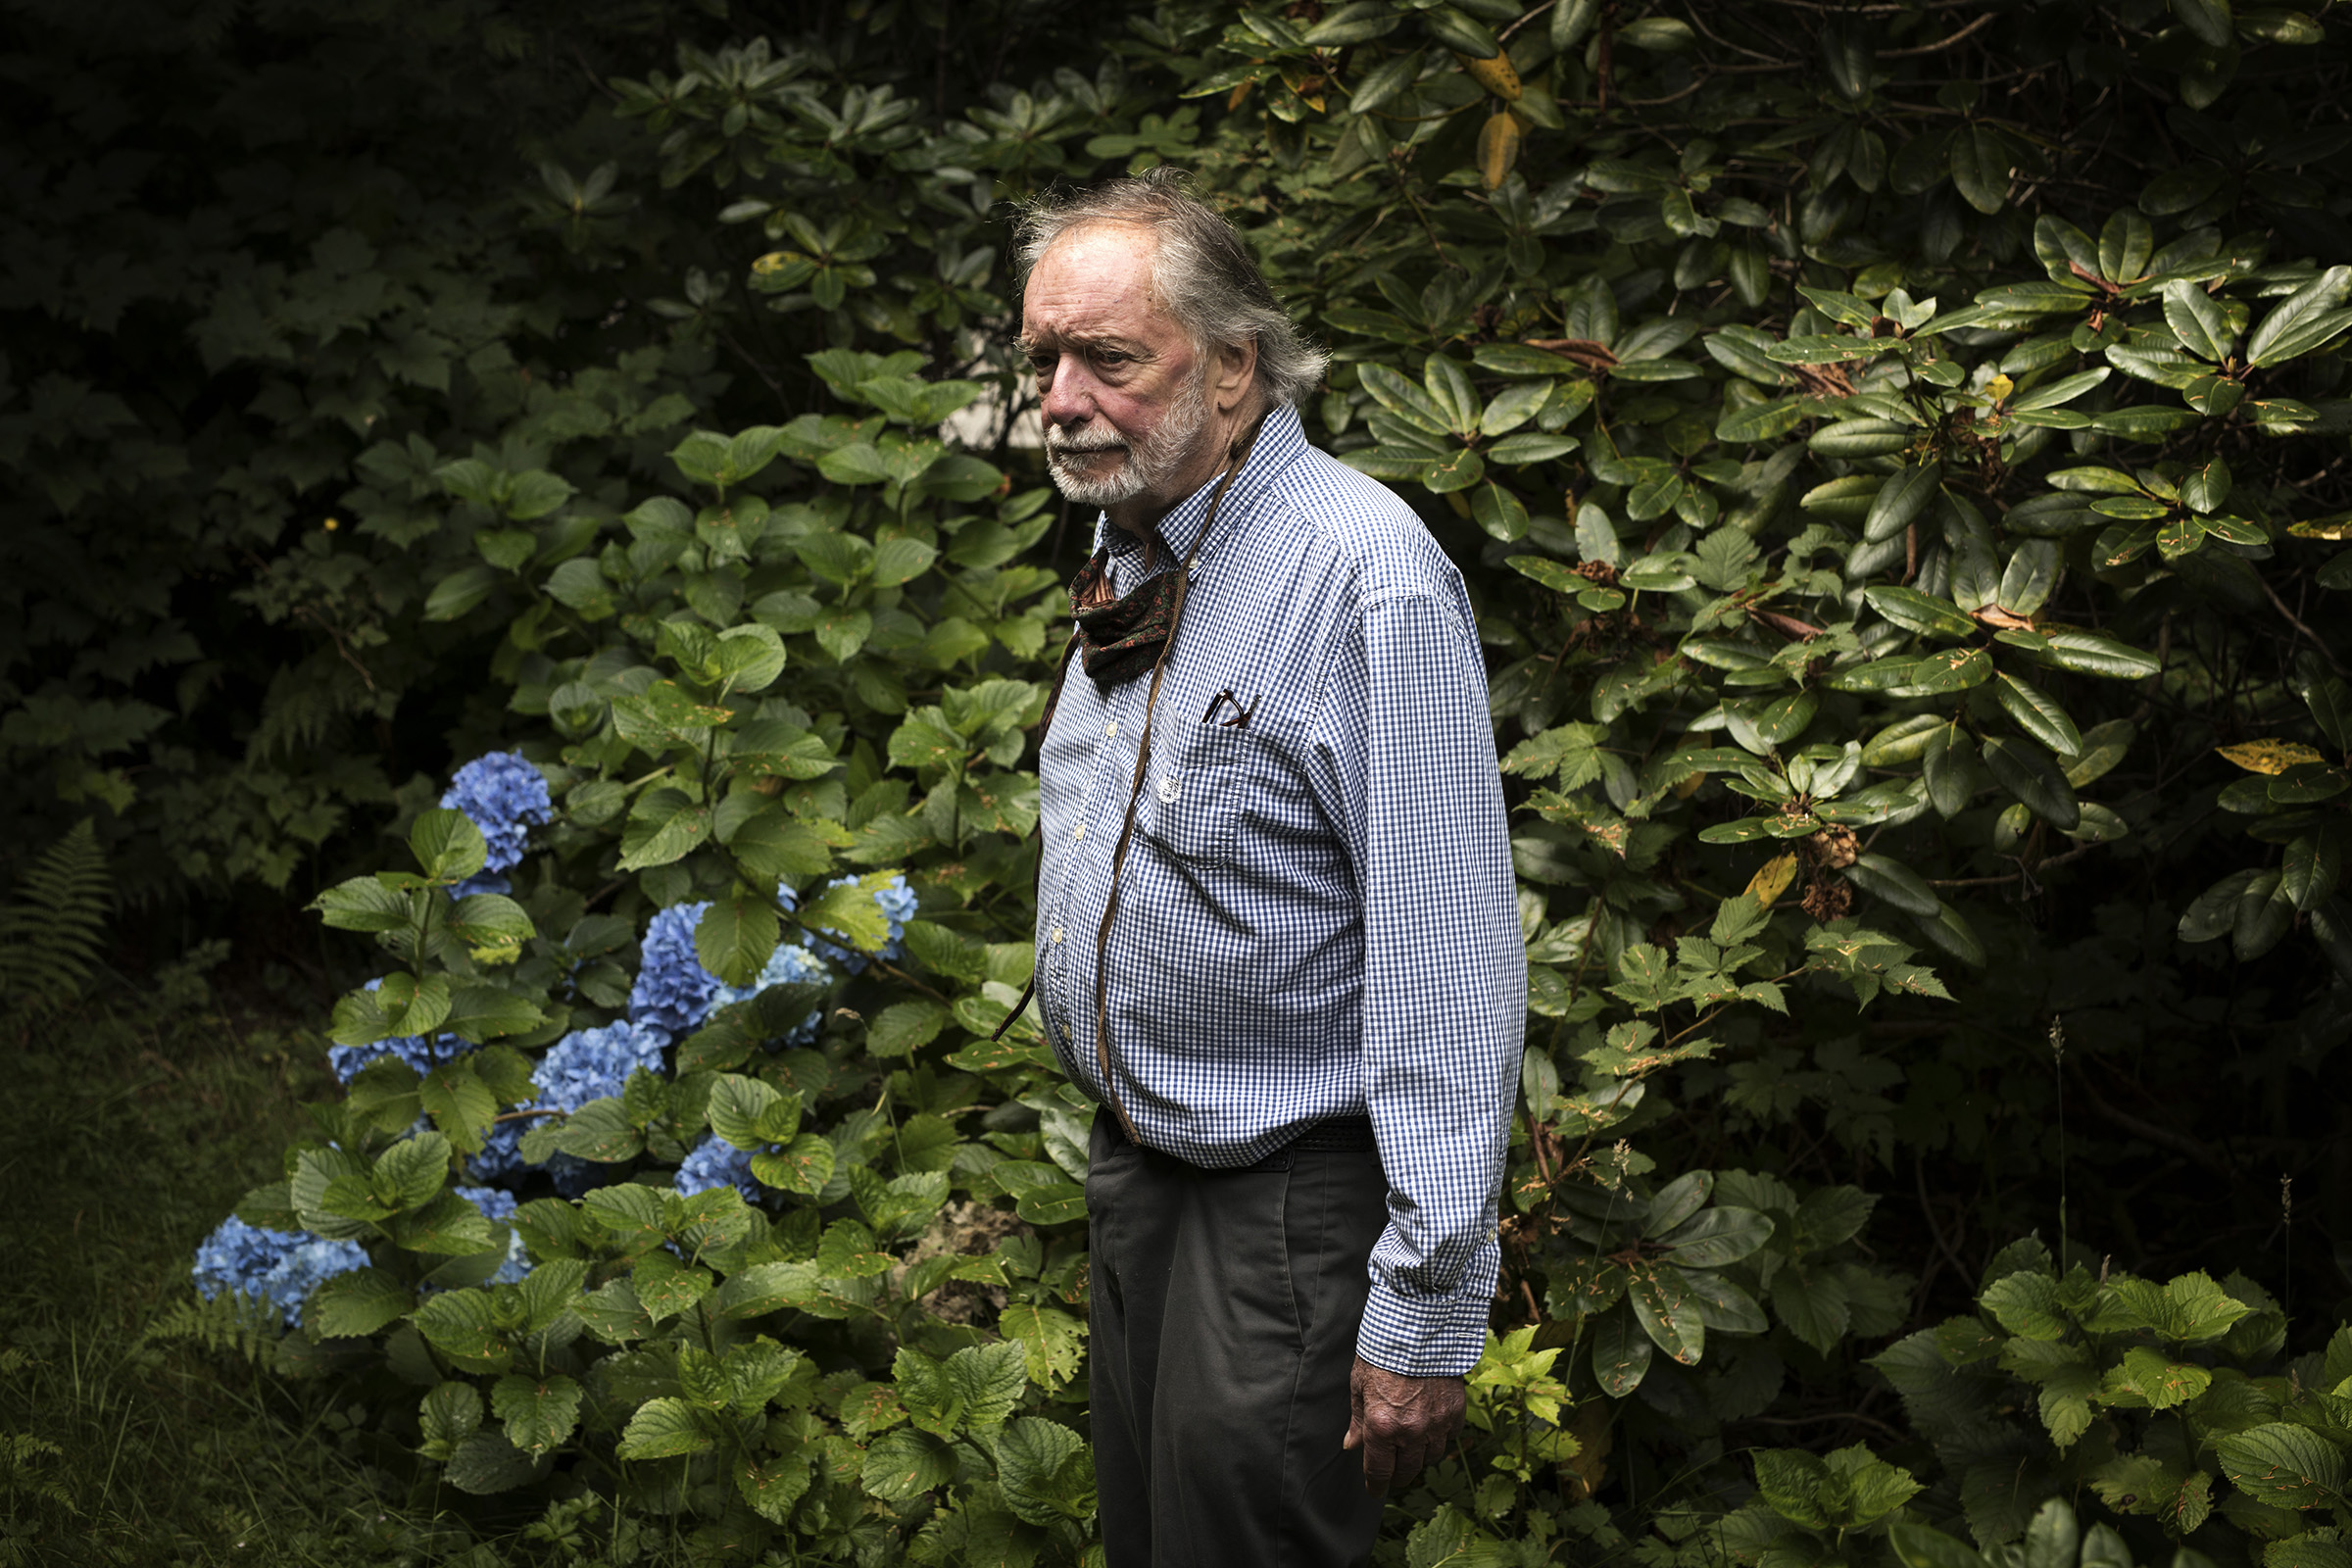 Louis Druehl poses for a photo outside his home in Bamfield, on Vancouver Island. The 83-year-old botanist has been studying kelp since 1962 and was the first person to create a kelp farm outside of Asia. (Melissa Renwick for TIME)